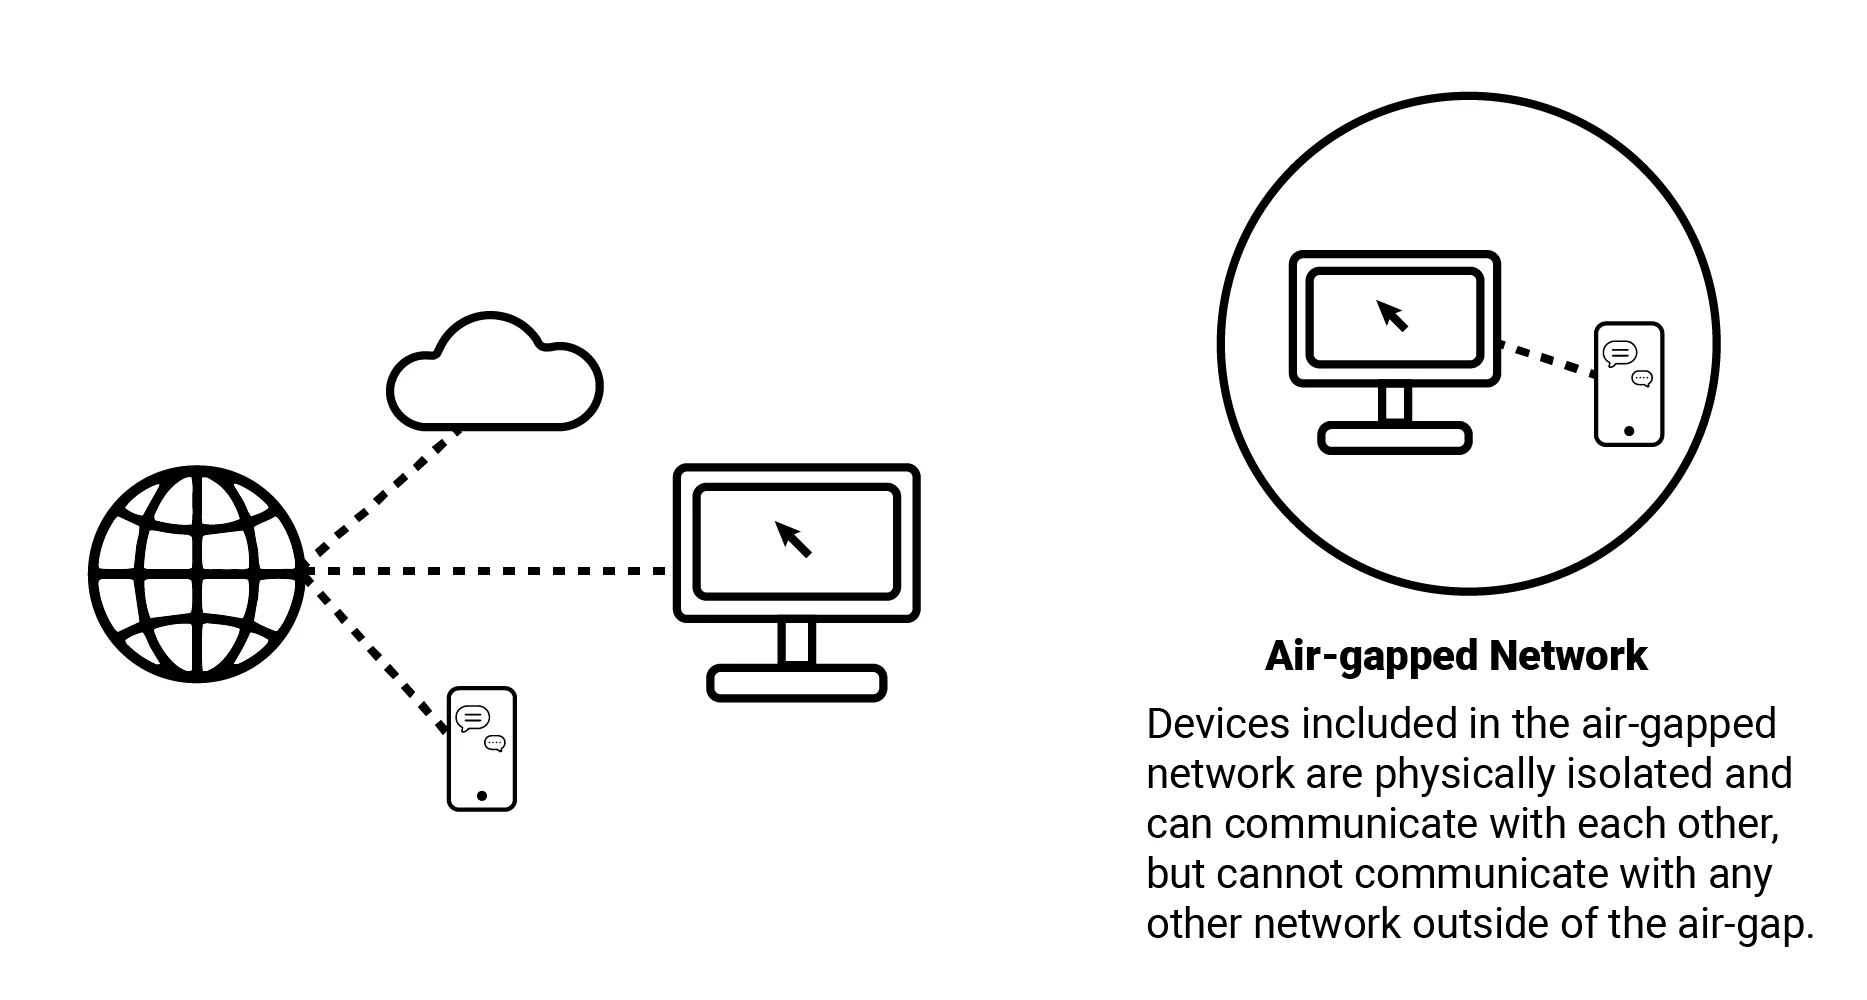 An air-gapped network is typically completely divided by outer networks in physical methods. Therefore, only via a human operator these systems communicate with other networks. (Image: Belden)